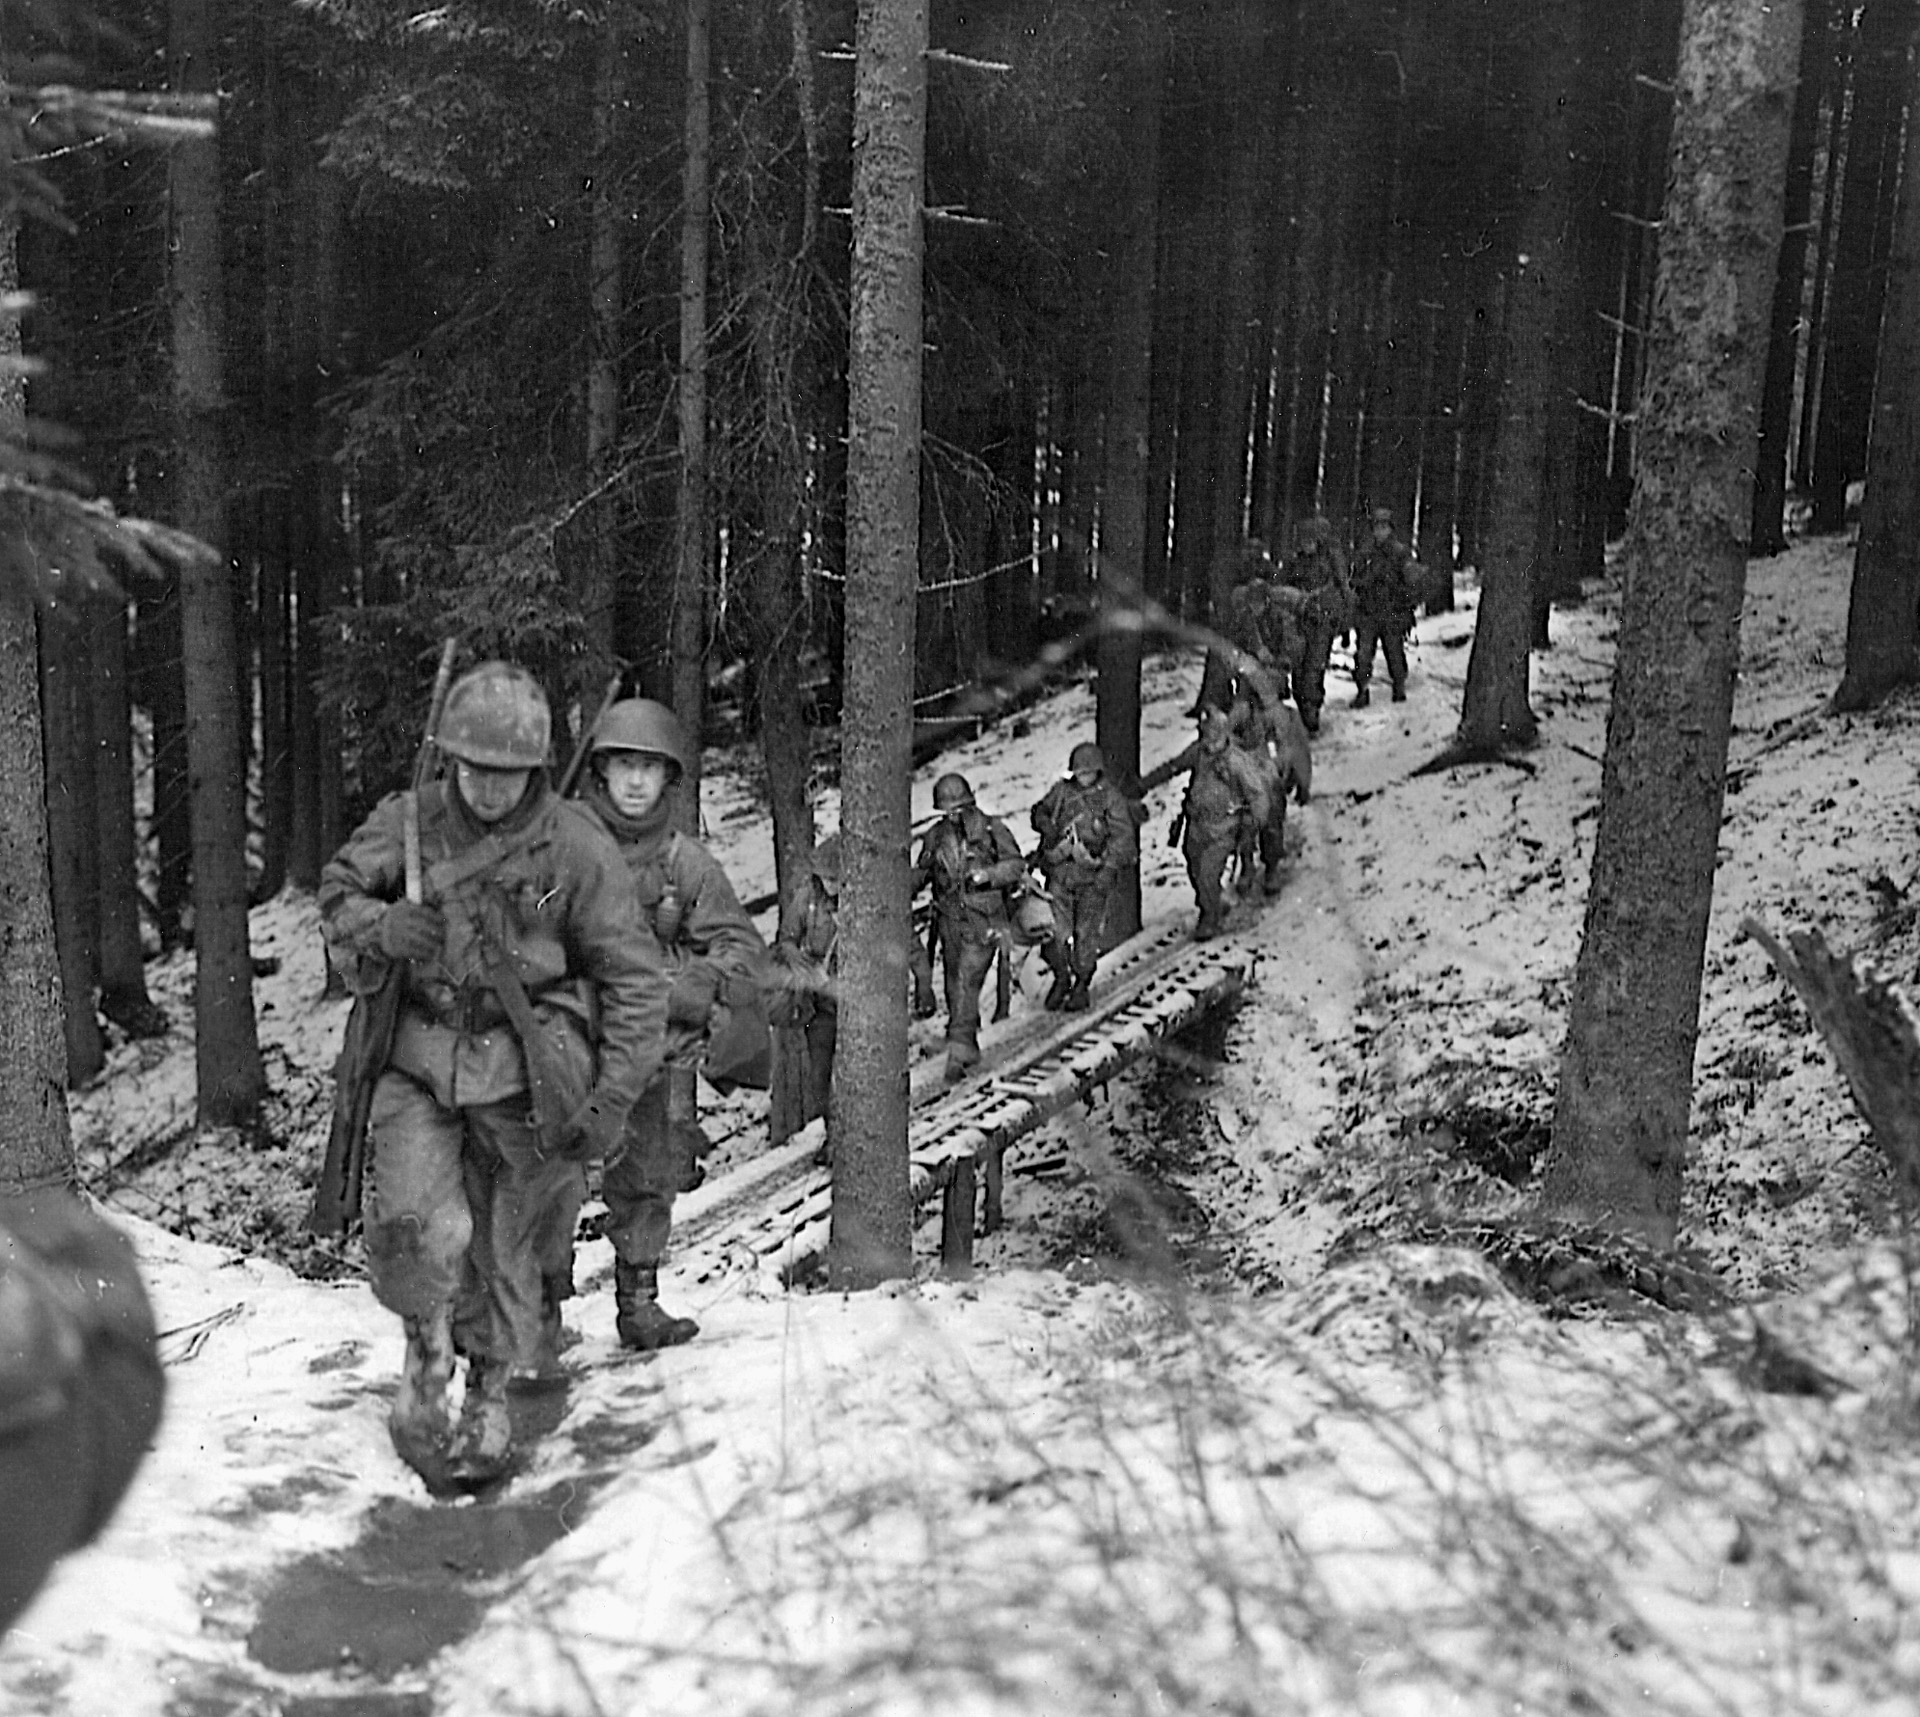 Volksgrenadiers of General der Artillerie Walter Lucht's LXVI Corps were tasked with eliminating the U.S. 106th Division deployed in the snow-covered hills east of St. Vith.